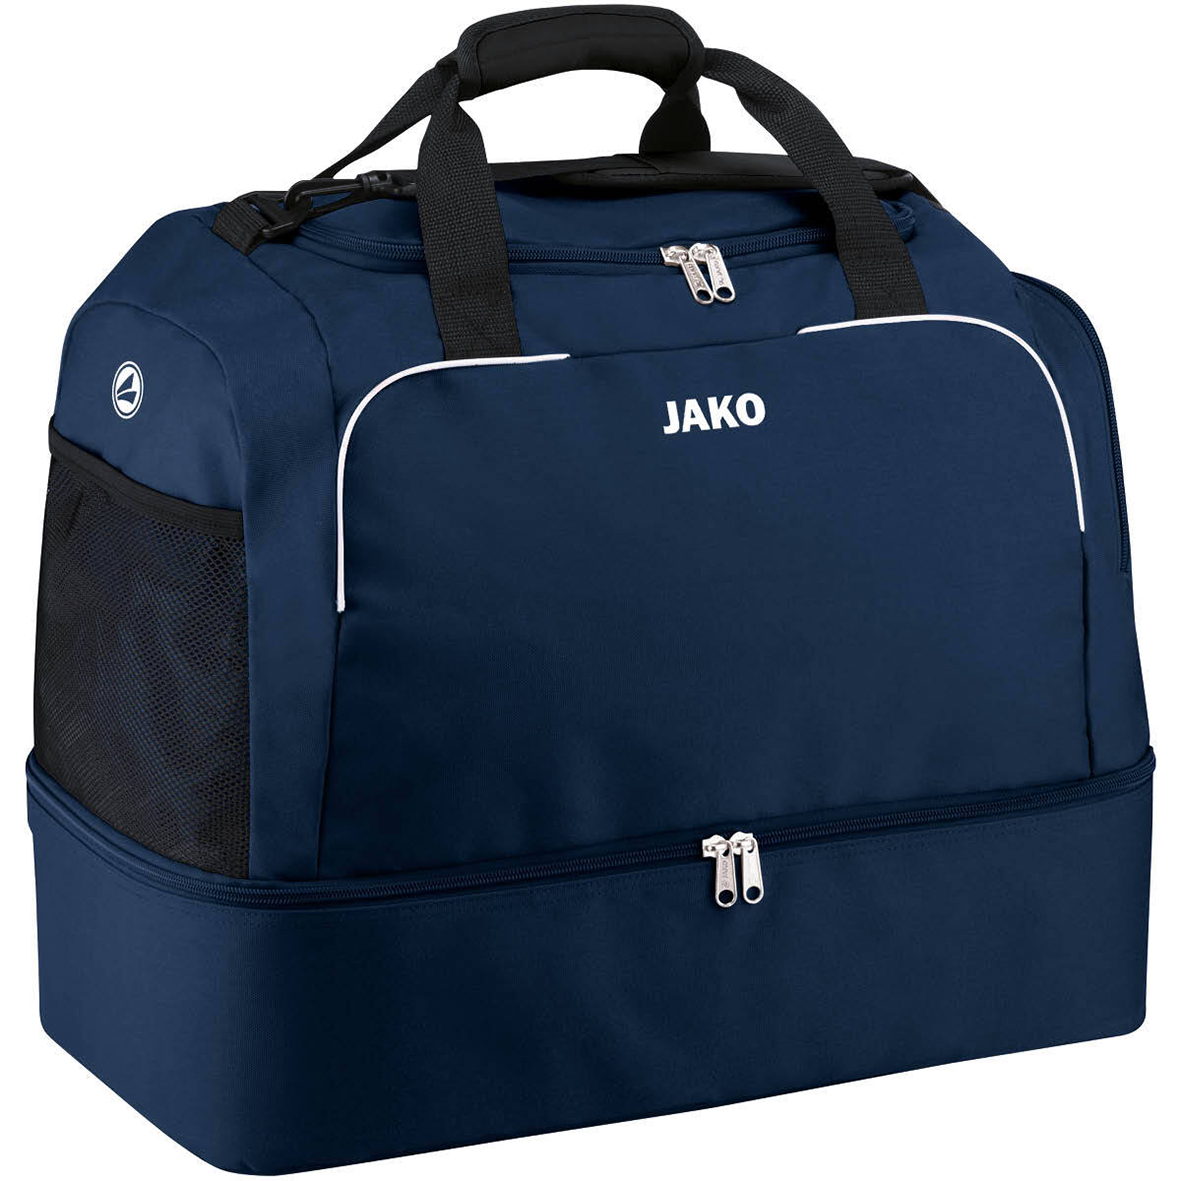 SPORTS BAG JAKO CLASSICO WITH BASE COMPARTMENT, SEABLUE.